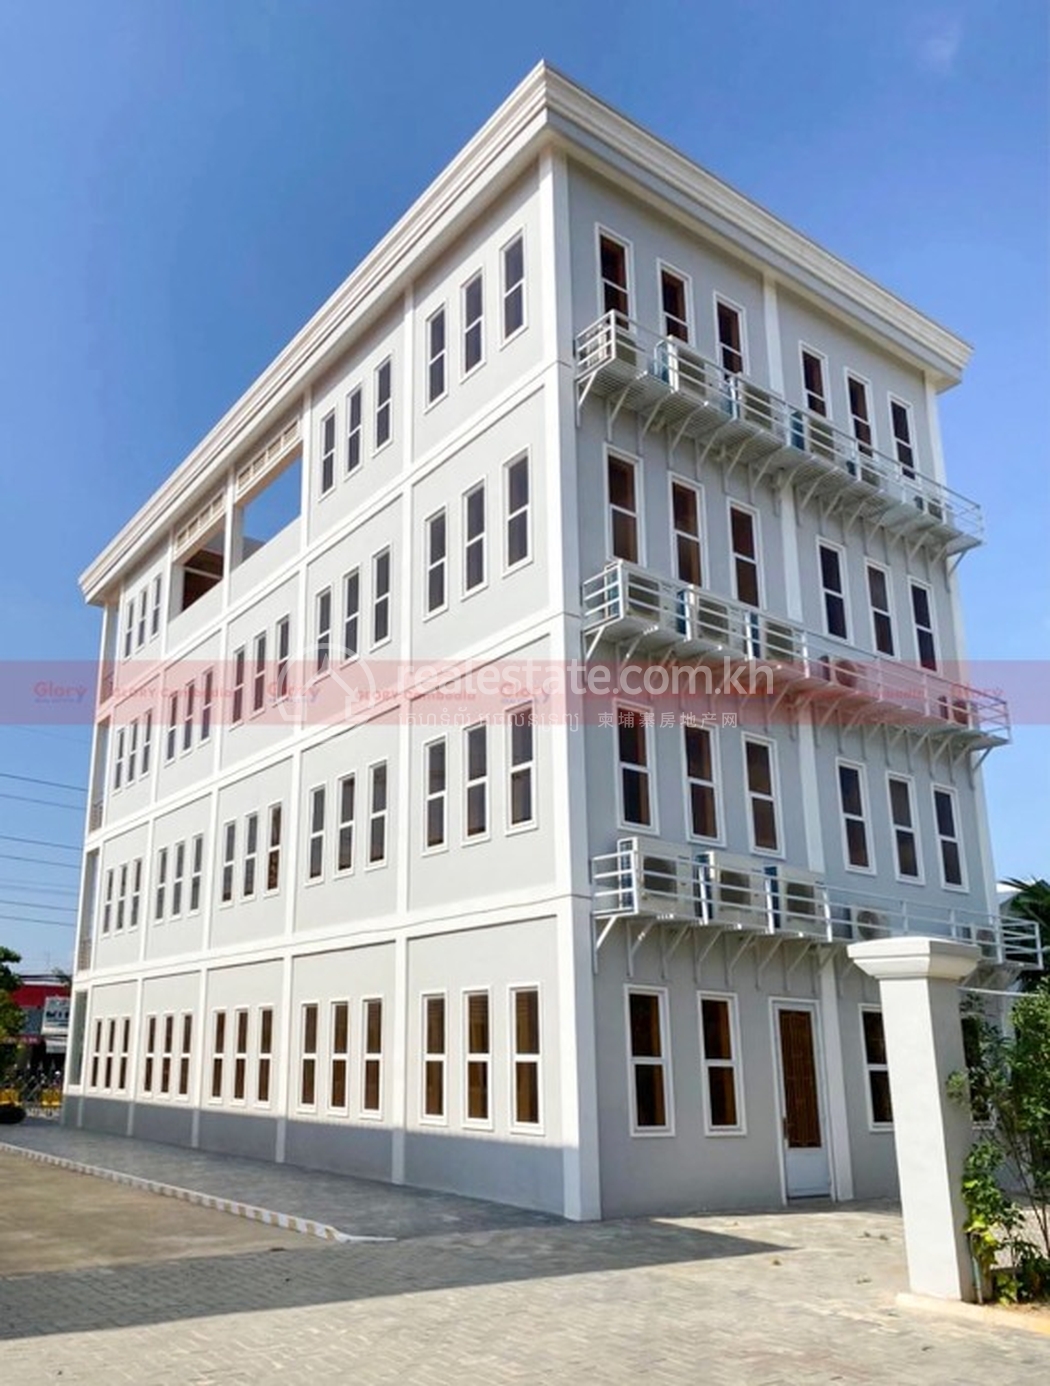 Office-Building-for-Lease-Along-Main-Business-Road-Near-AEON-2-Img2.jpg